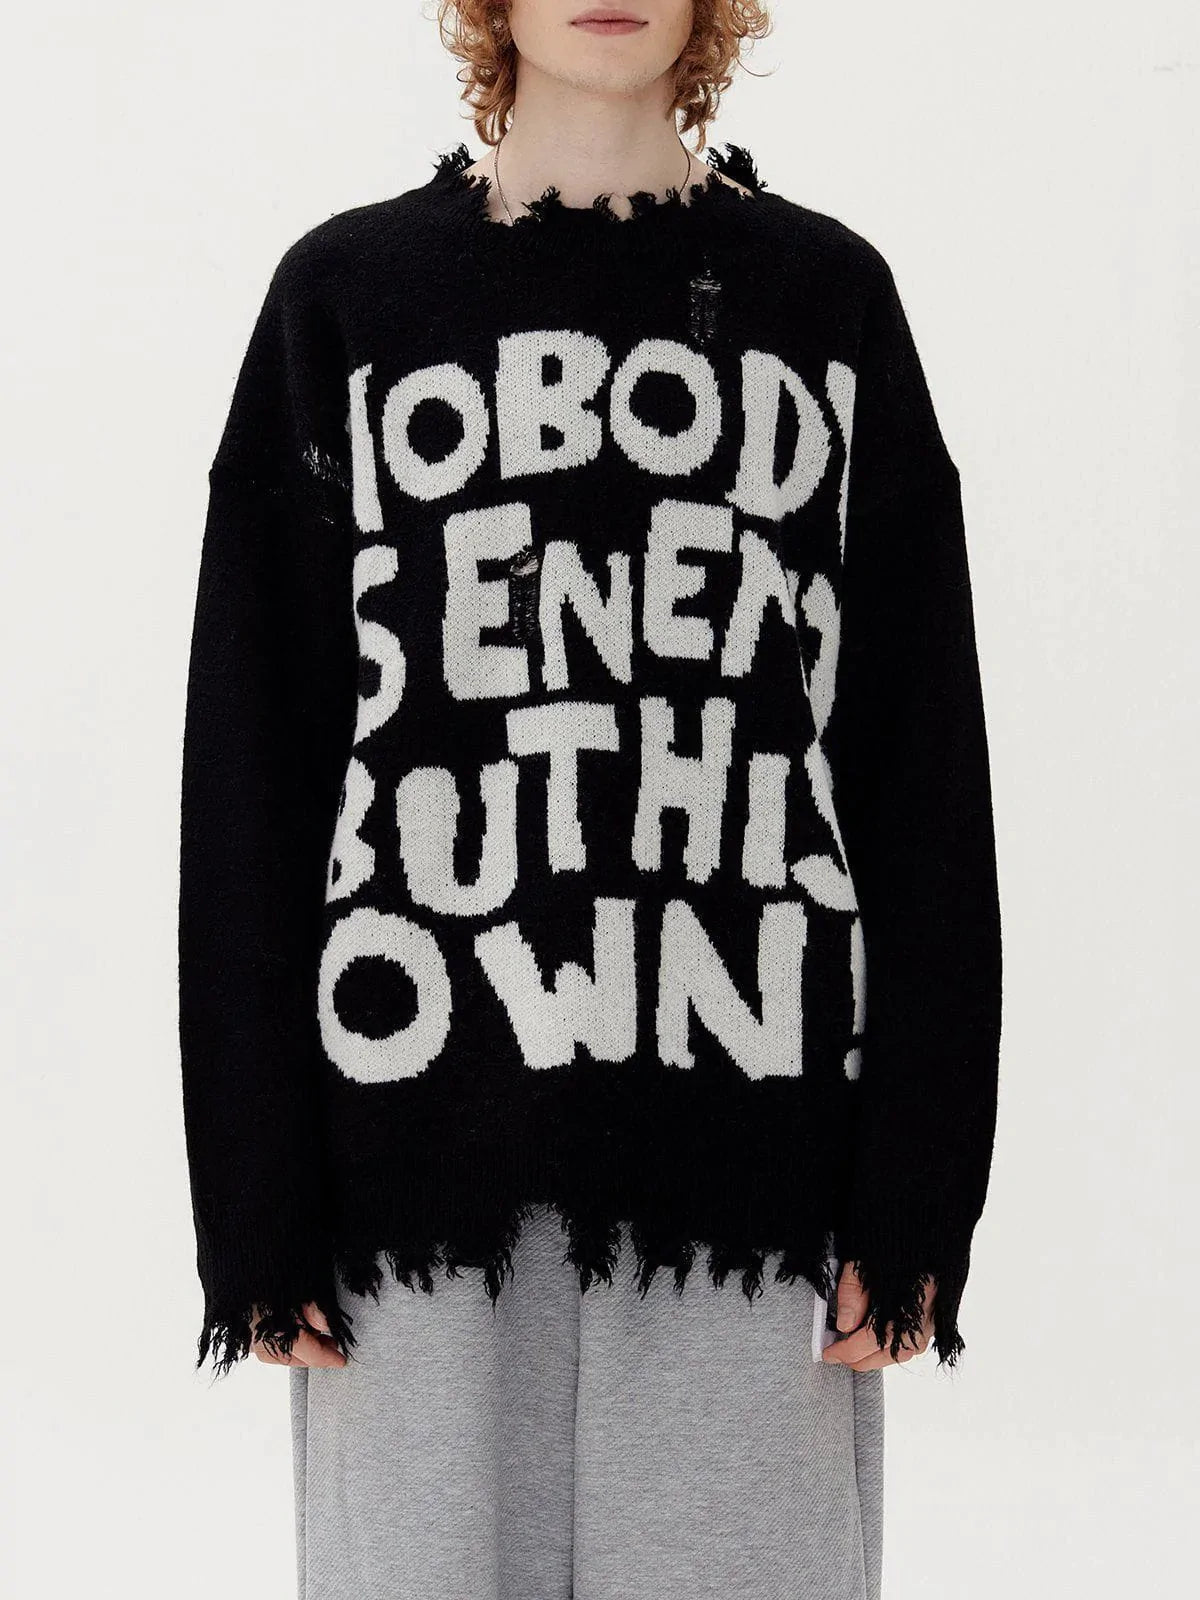 Majesda® - Letters Ripped Hole Sweater outfit ideas streetwear fashion